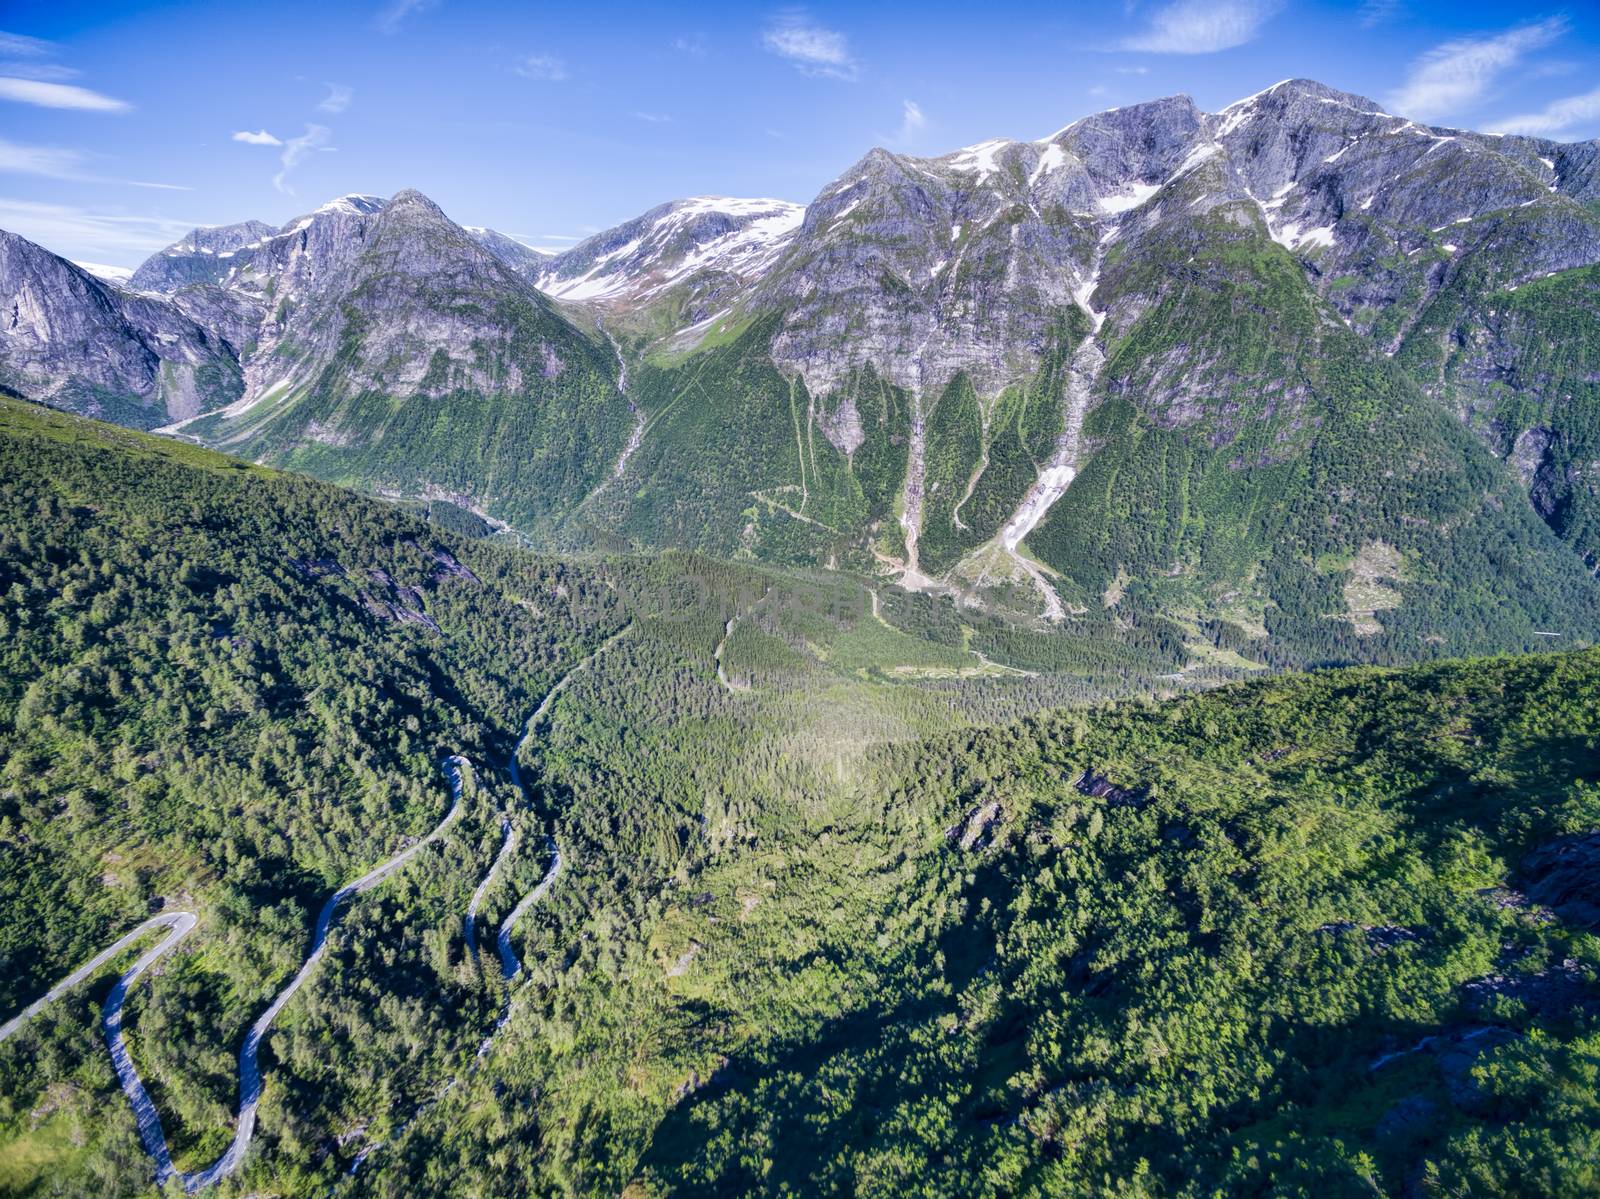 Gaularfjellet mountain pass in Norway surrounded by magnificent mountains